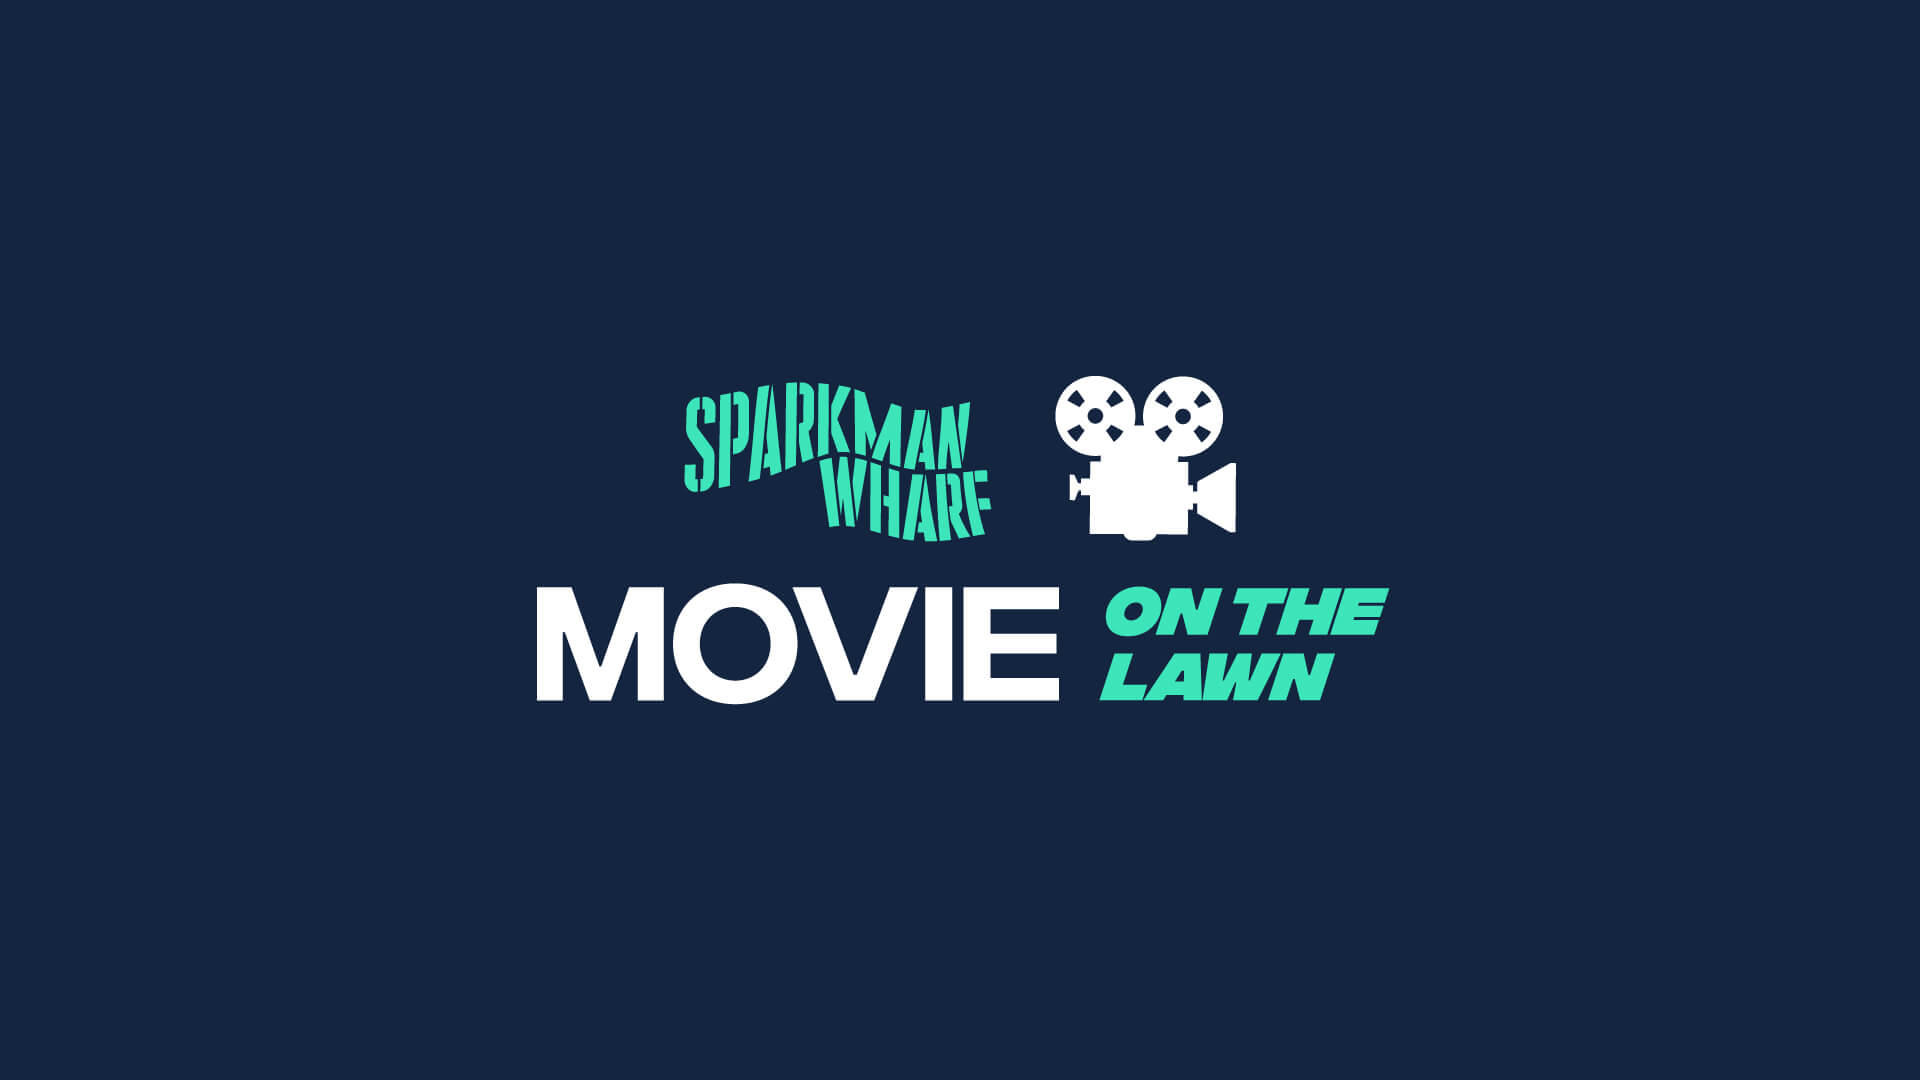 A graphic for movie on the lawn at sparkman wharf